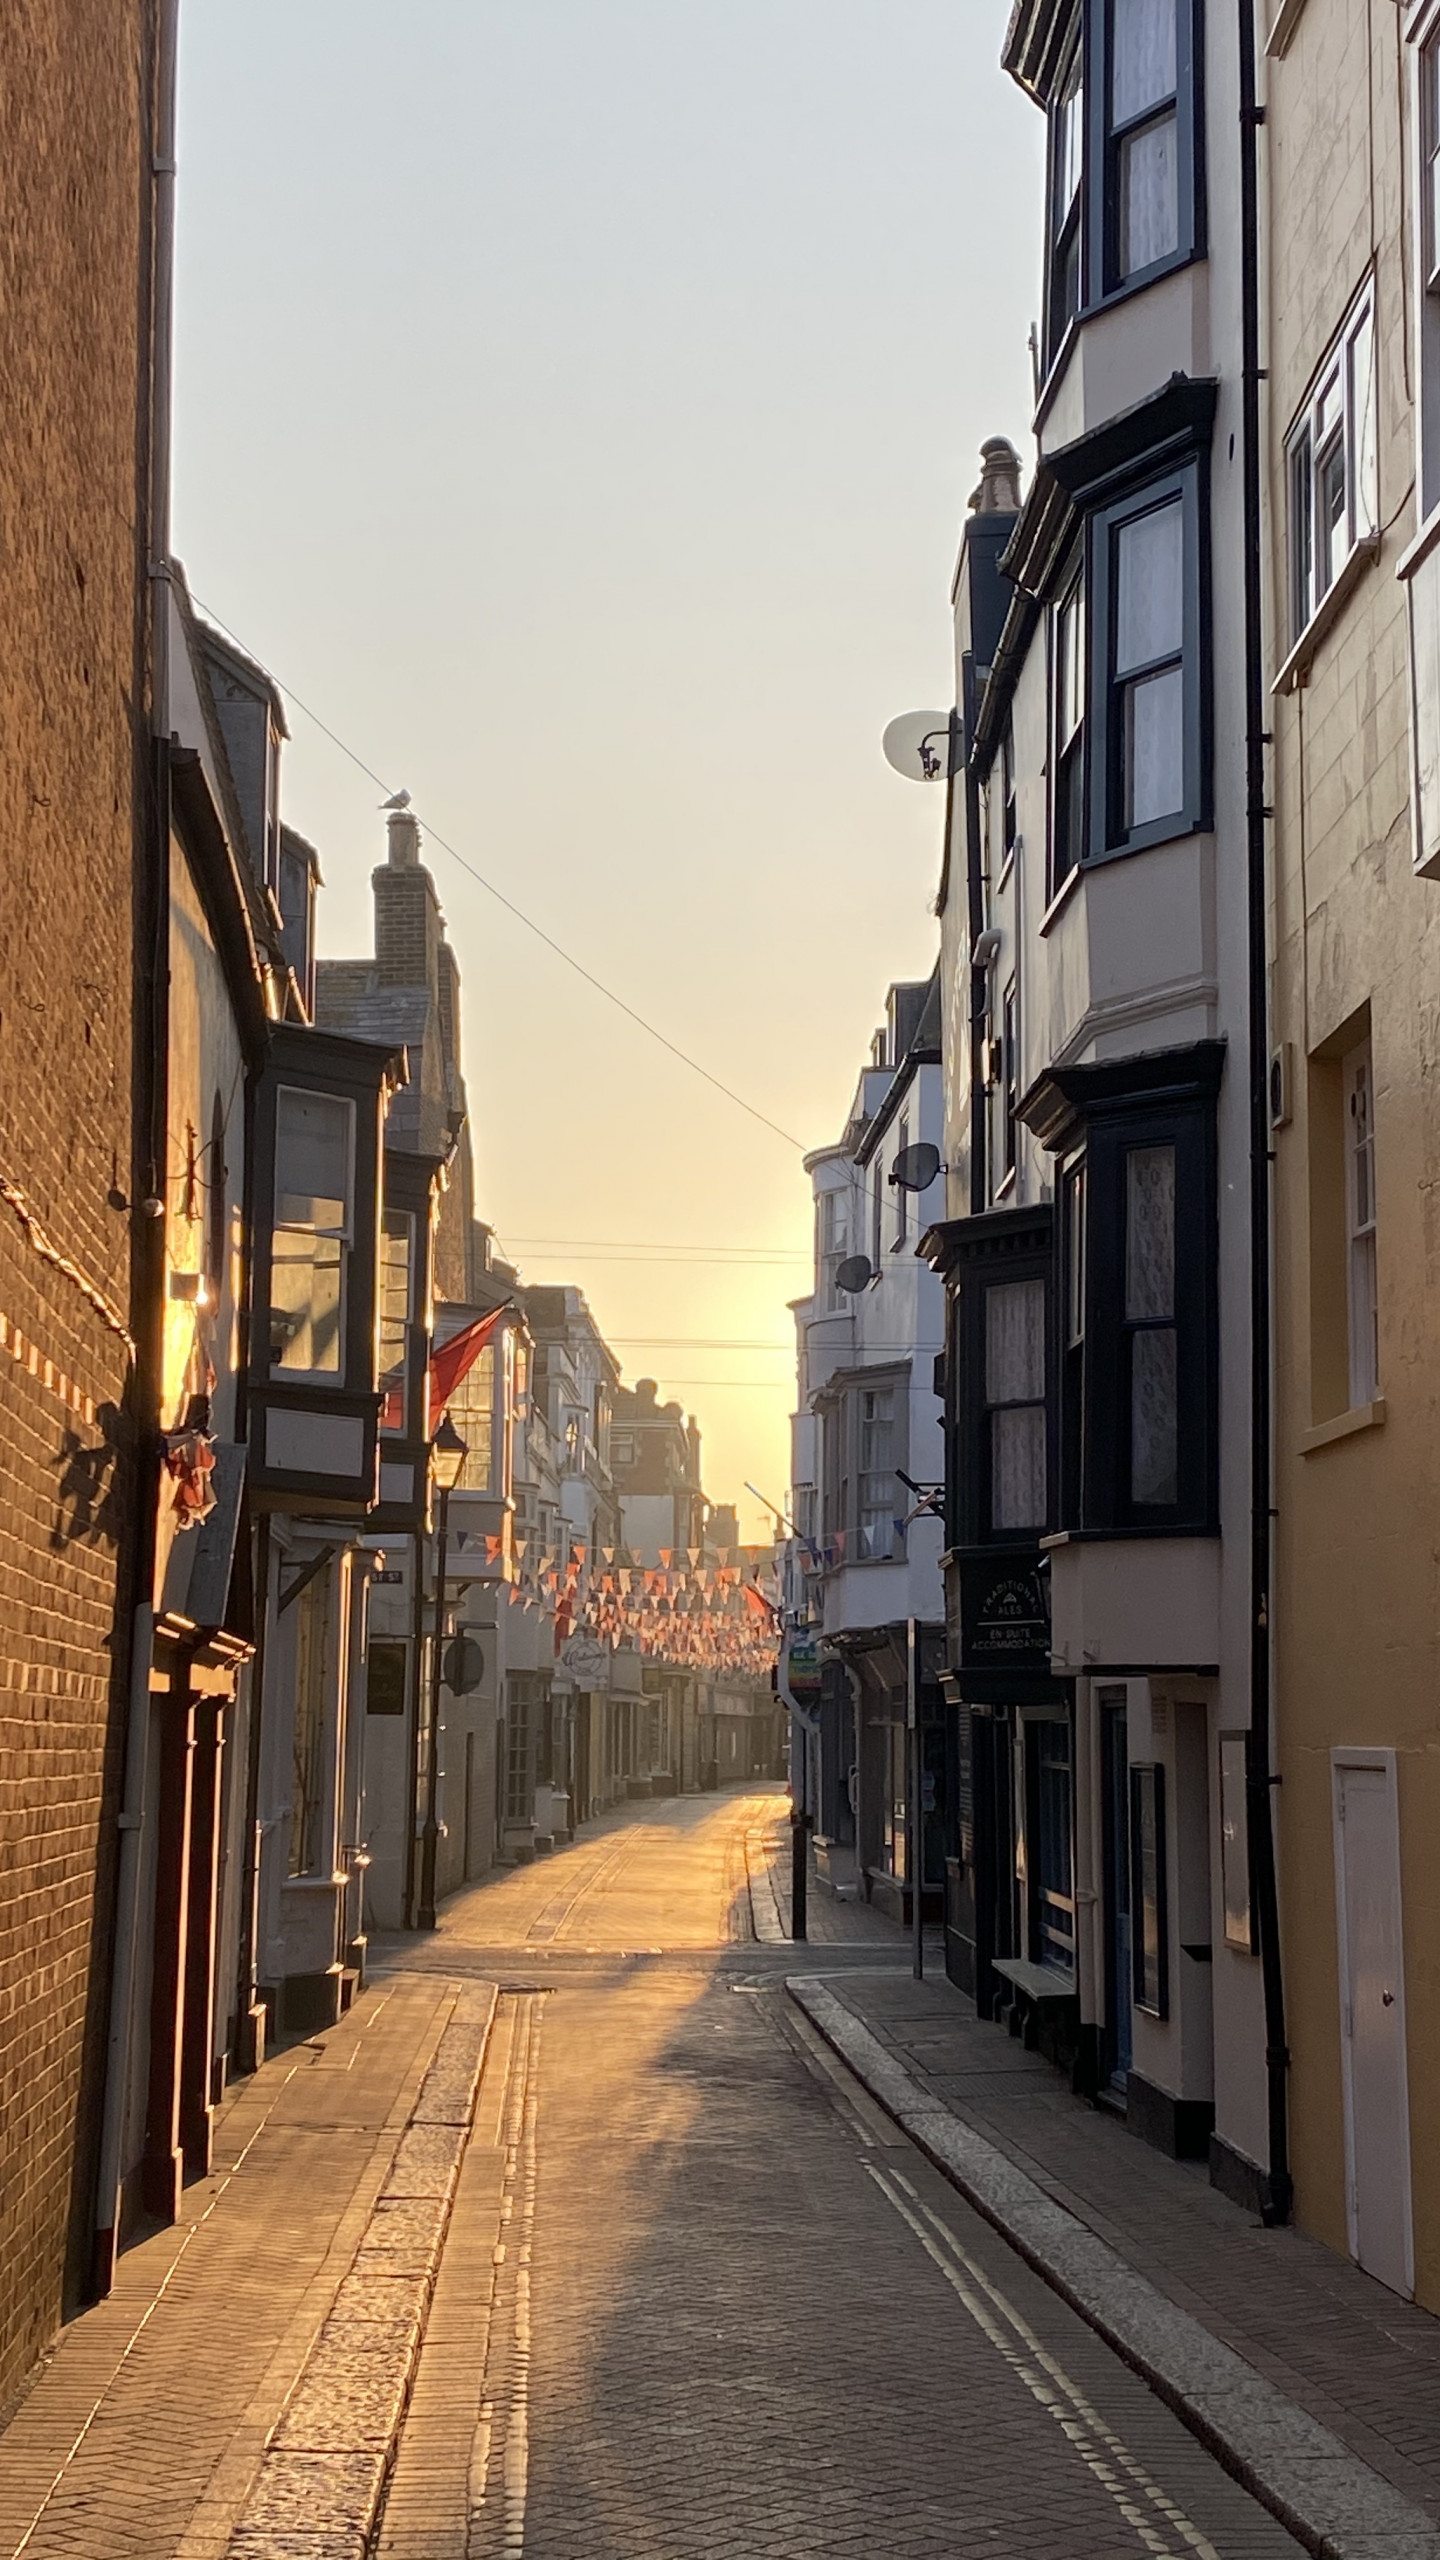  Taken in Weymouth, a seaside lovely town which has gorgeous beach and coastline.  © Jie Zhou